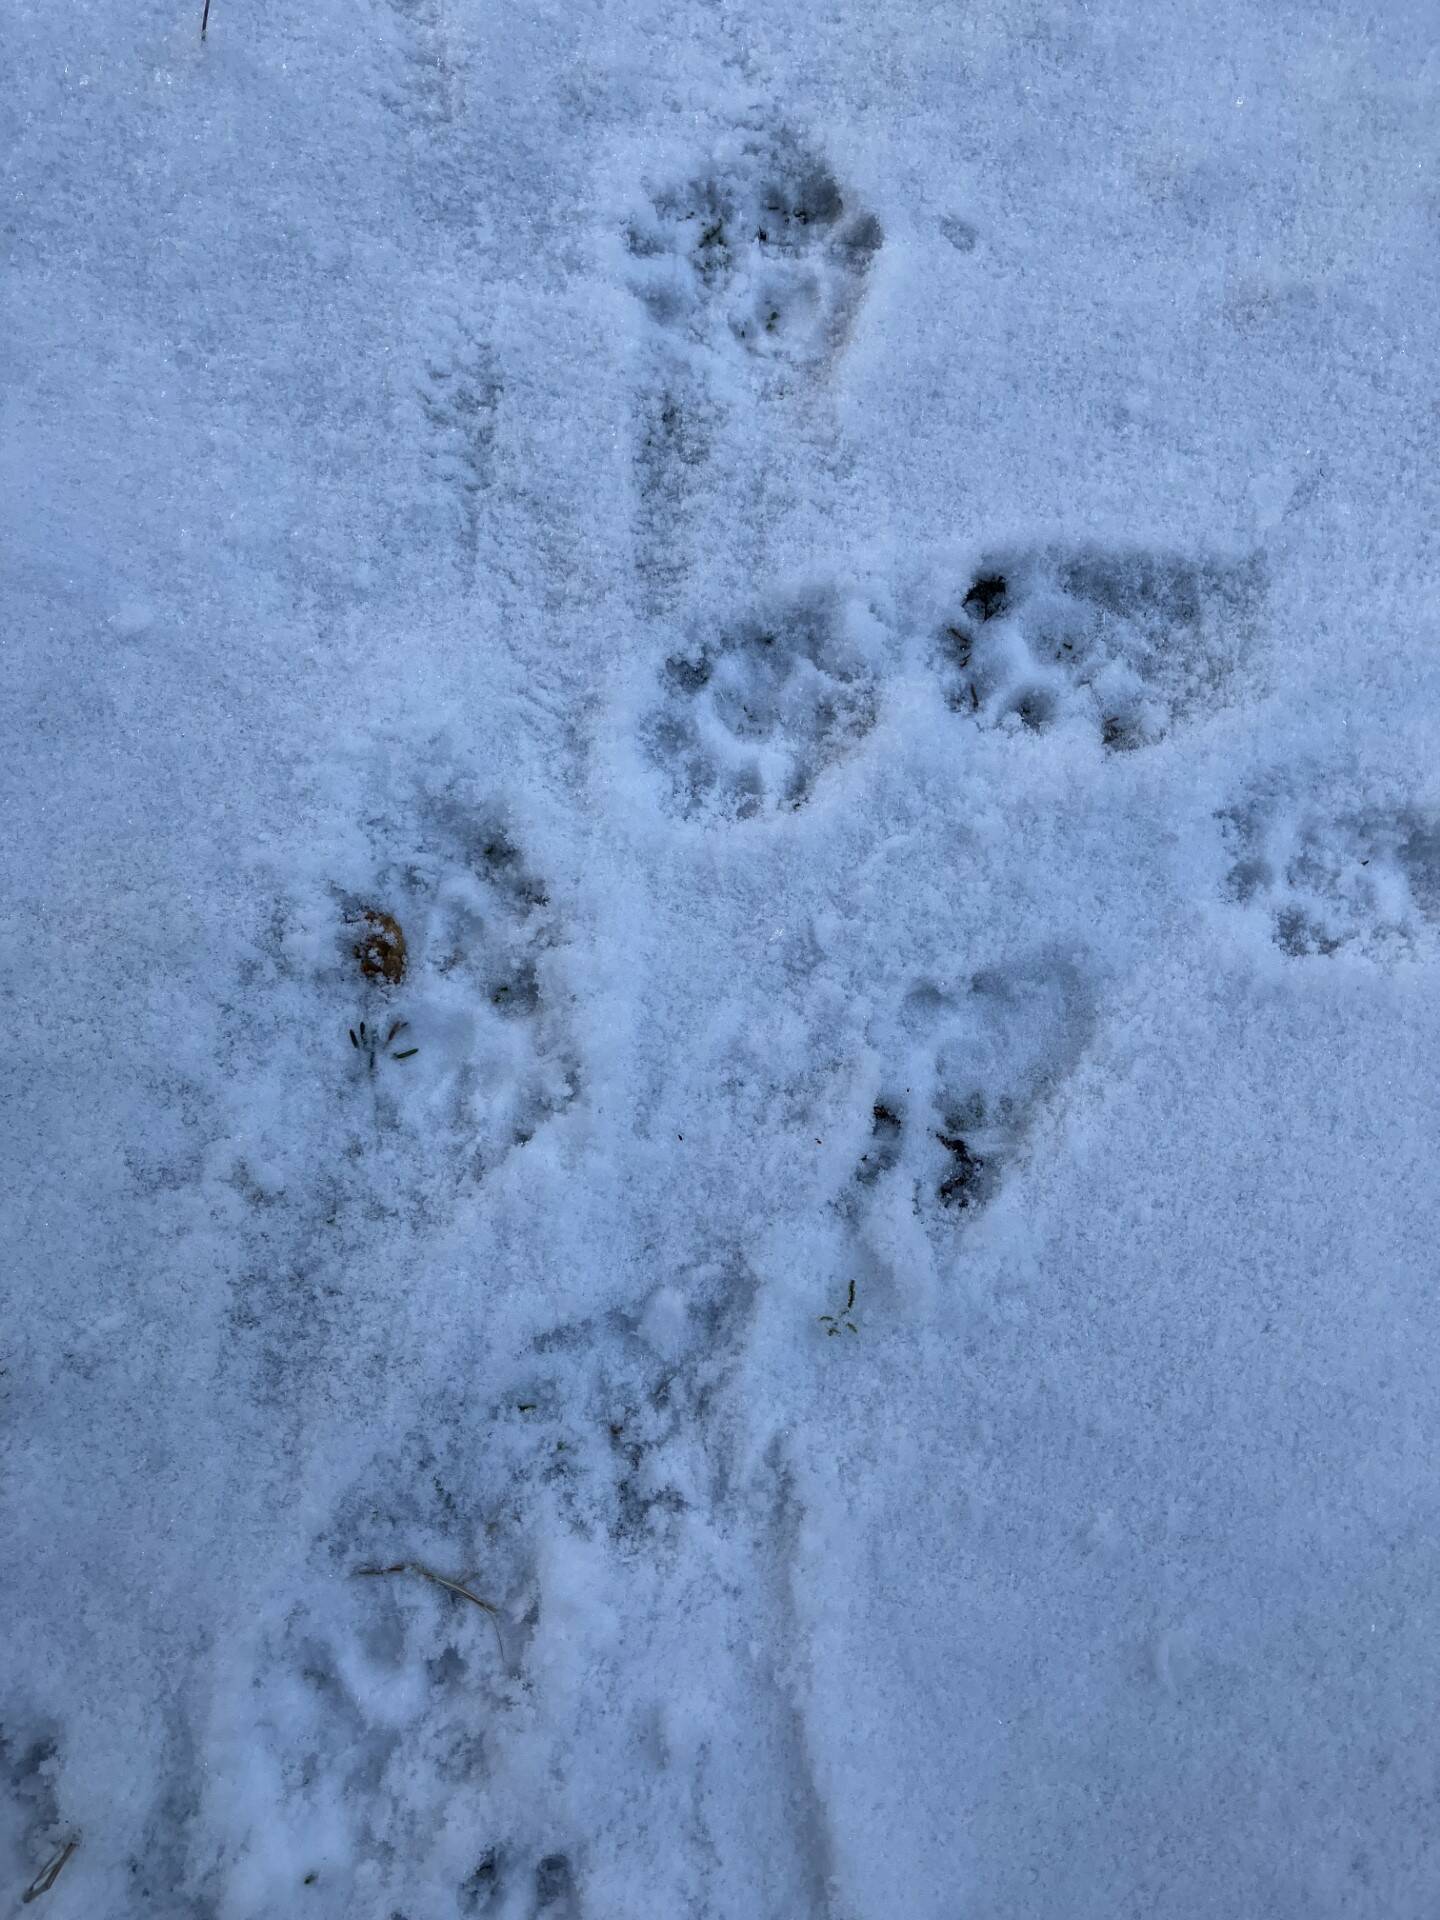 Otter tracks at the edge of a creek show five toe pads, unlike those of a dog, which has four toe pads. (Photo by Mary F. Willson)